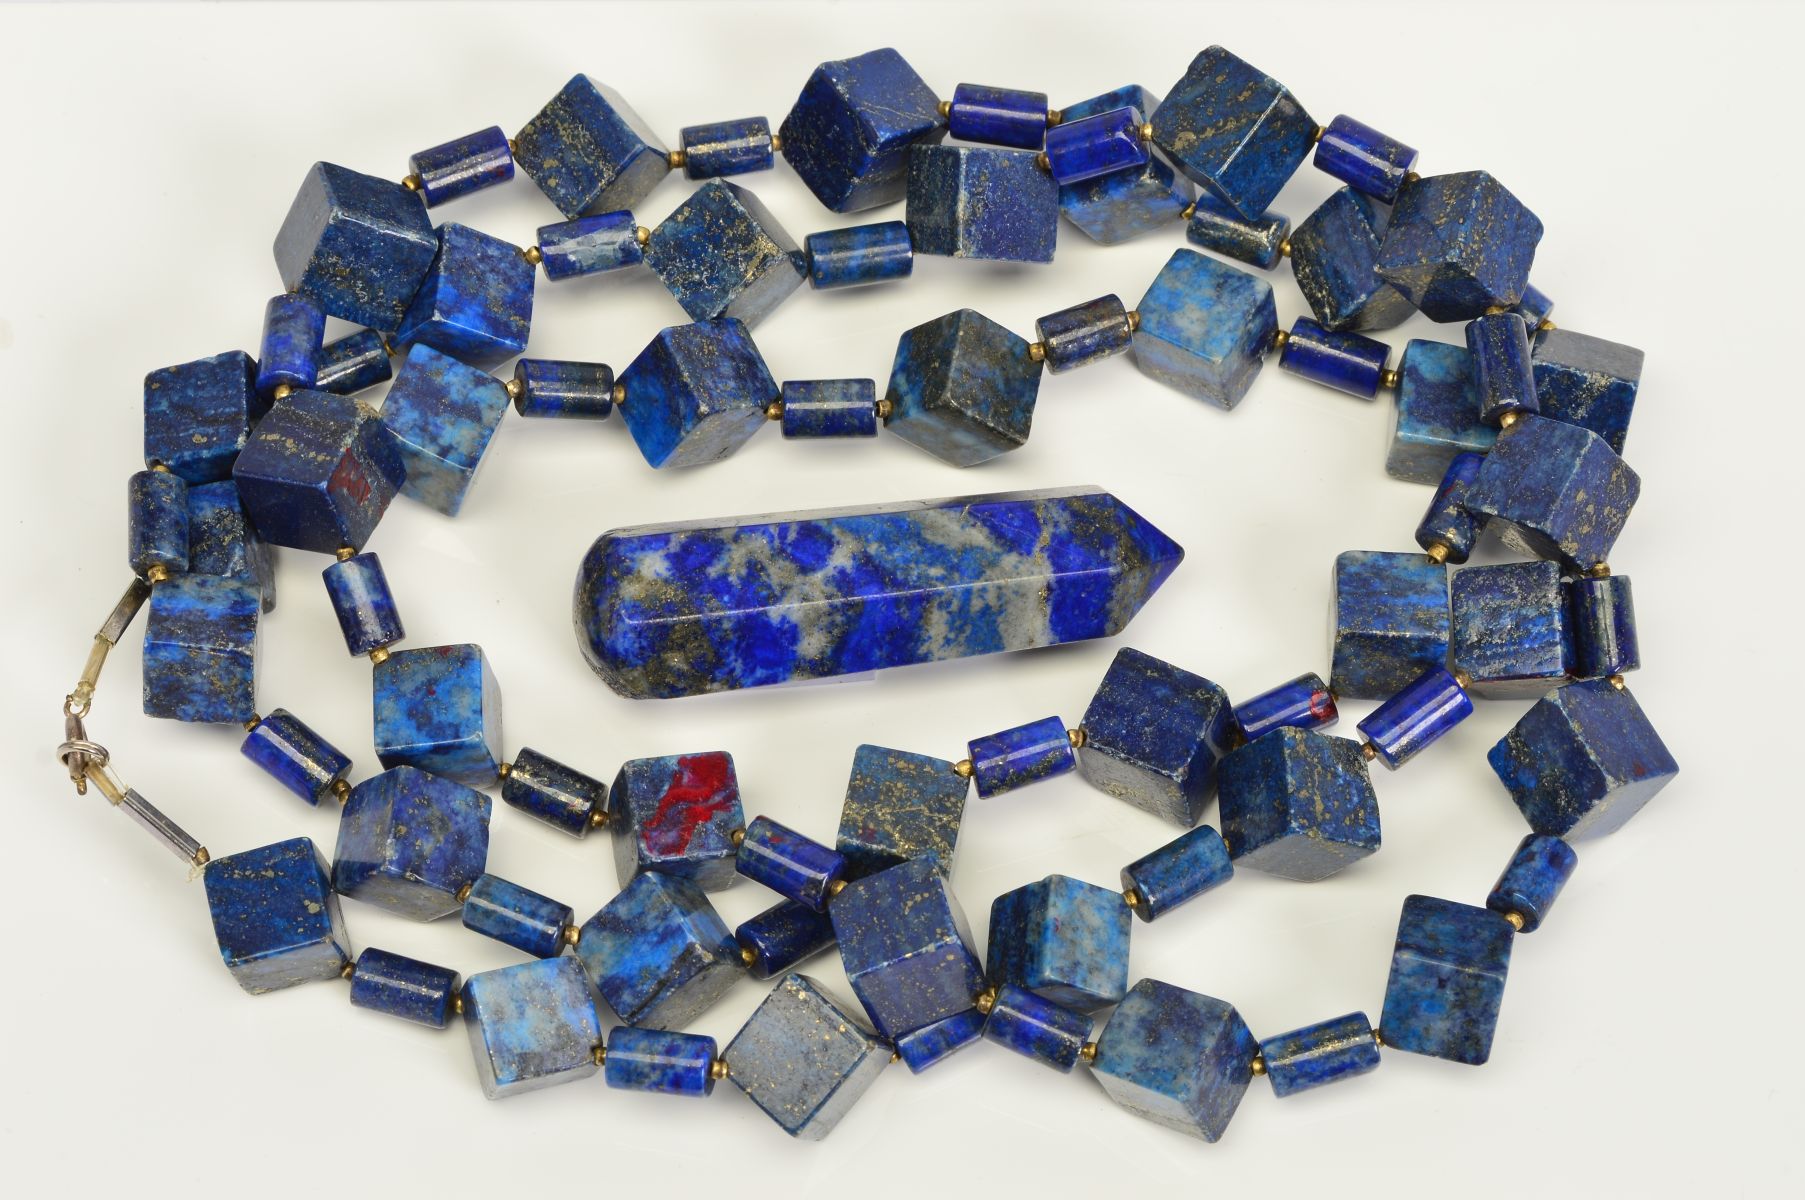 A LONG LAPIS LAZULI BEAD NECKLACE AND A LAPIS LAZULI PAPERWEIGHT, the necklace designed as cube